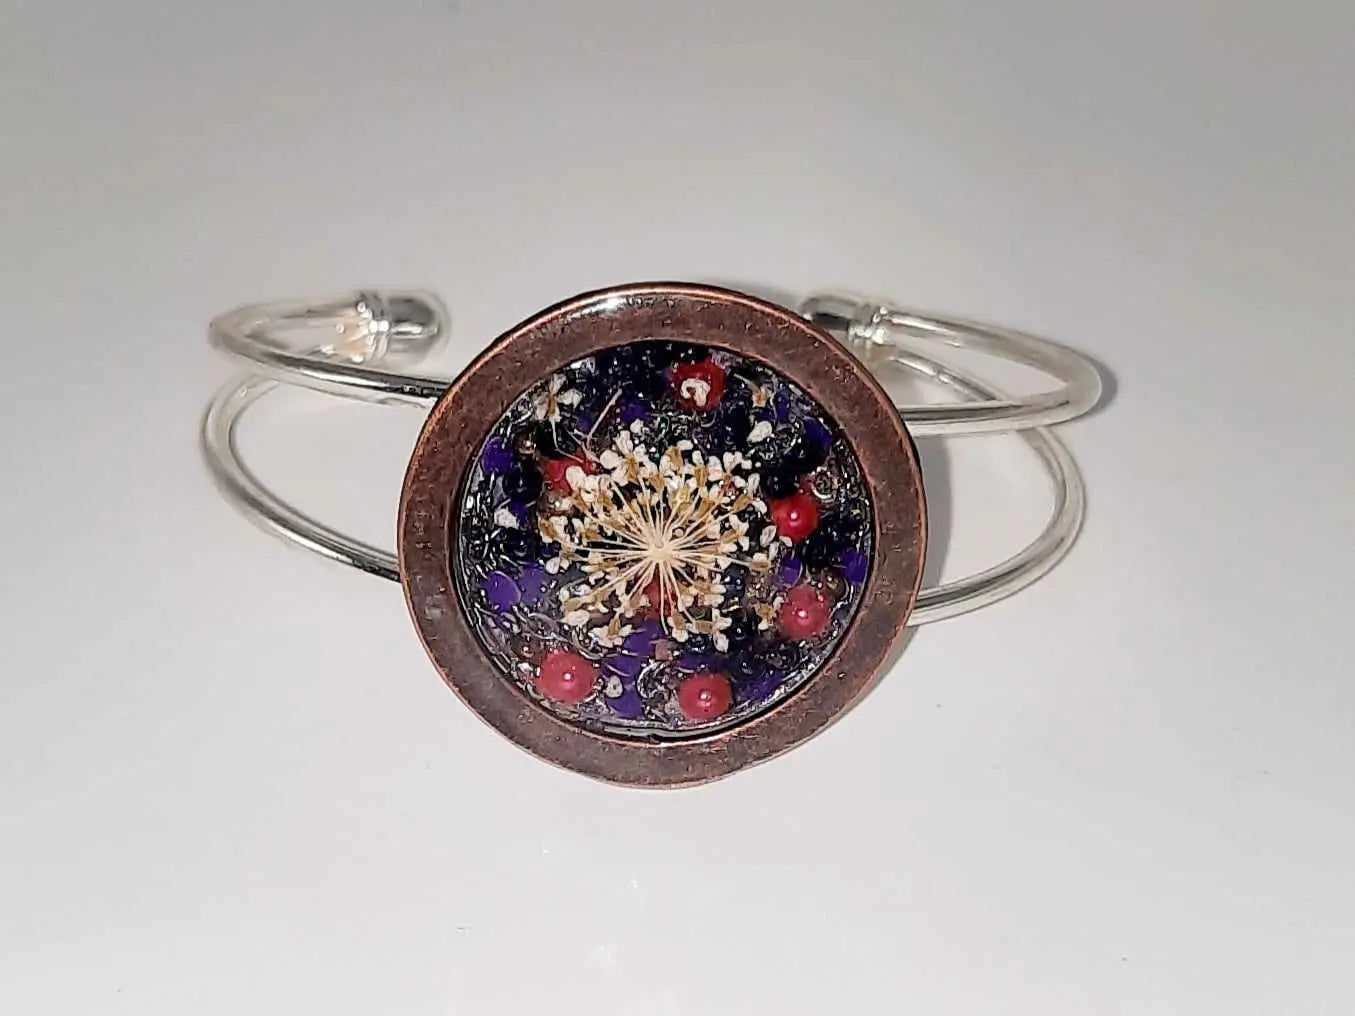 Handcrafted silver copper cuff bracelet by Josie's - Image #2